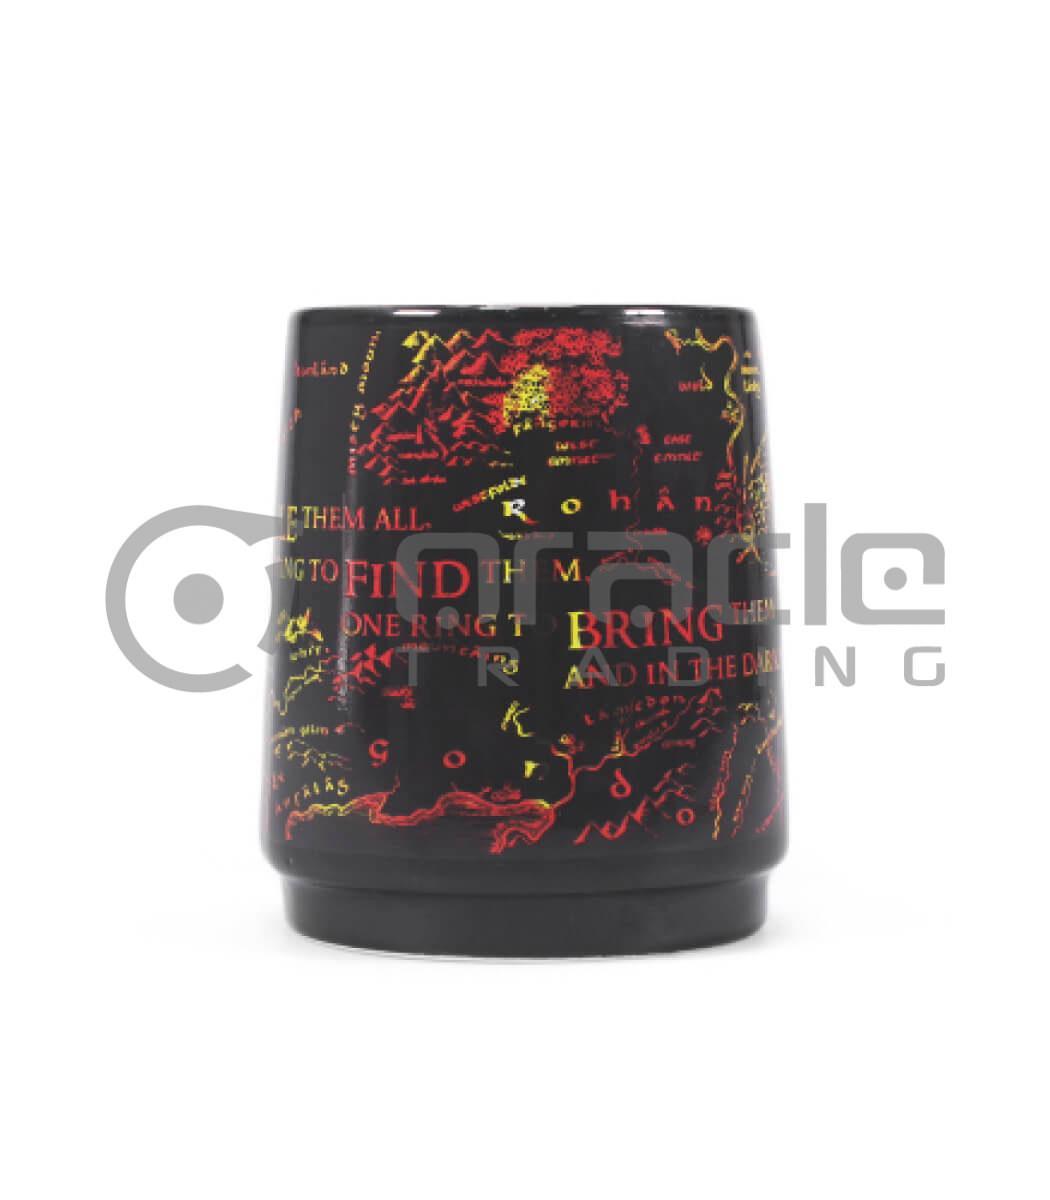 heat reveal tankard lord of the rings eye of sauron smg003 c